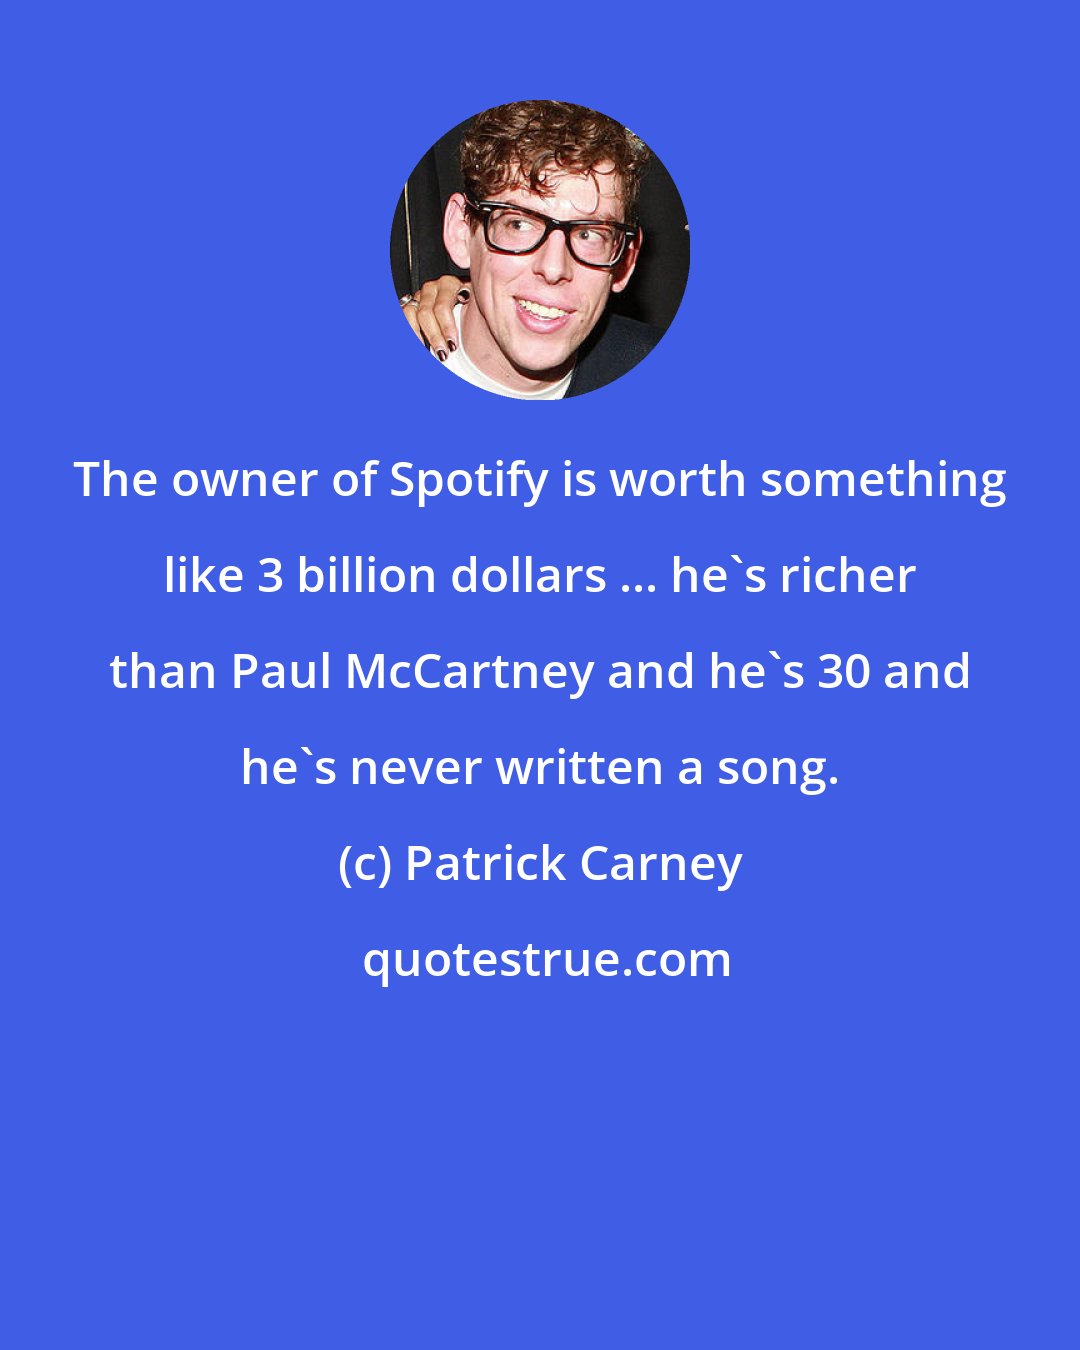 Patrick Carney: The owner of Spotify is worth something like 3 billion dollars ... he's richer than Paul McCartney and he's 30 and he's never written a song.